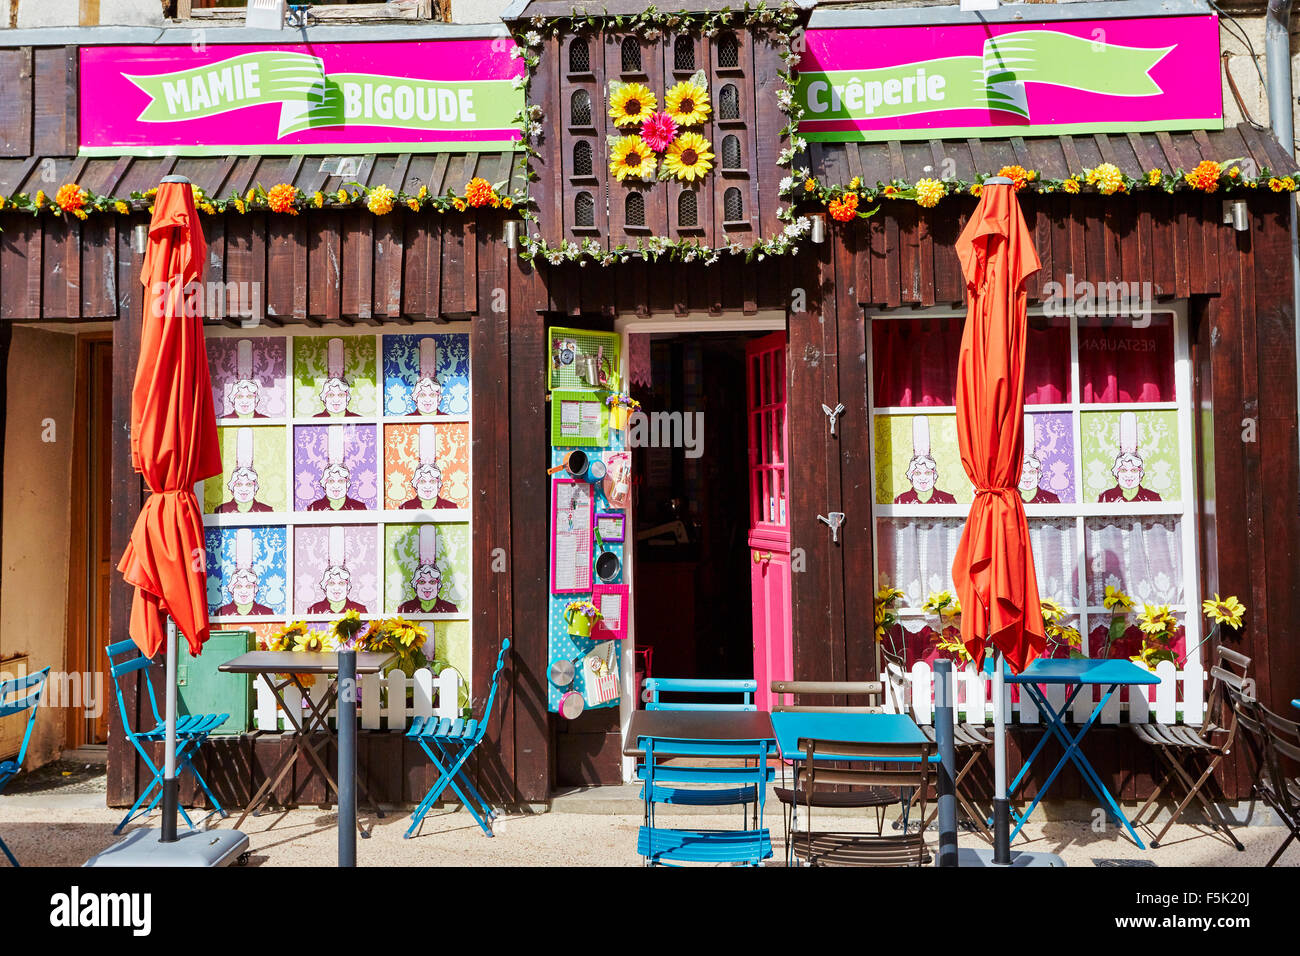 Mamie Bigoude creperie and restaurant in Limoges, Limousin, Haute-Vienne,  France Stock Photo - Alamy